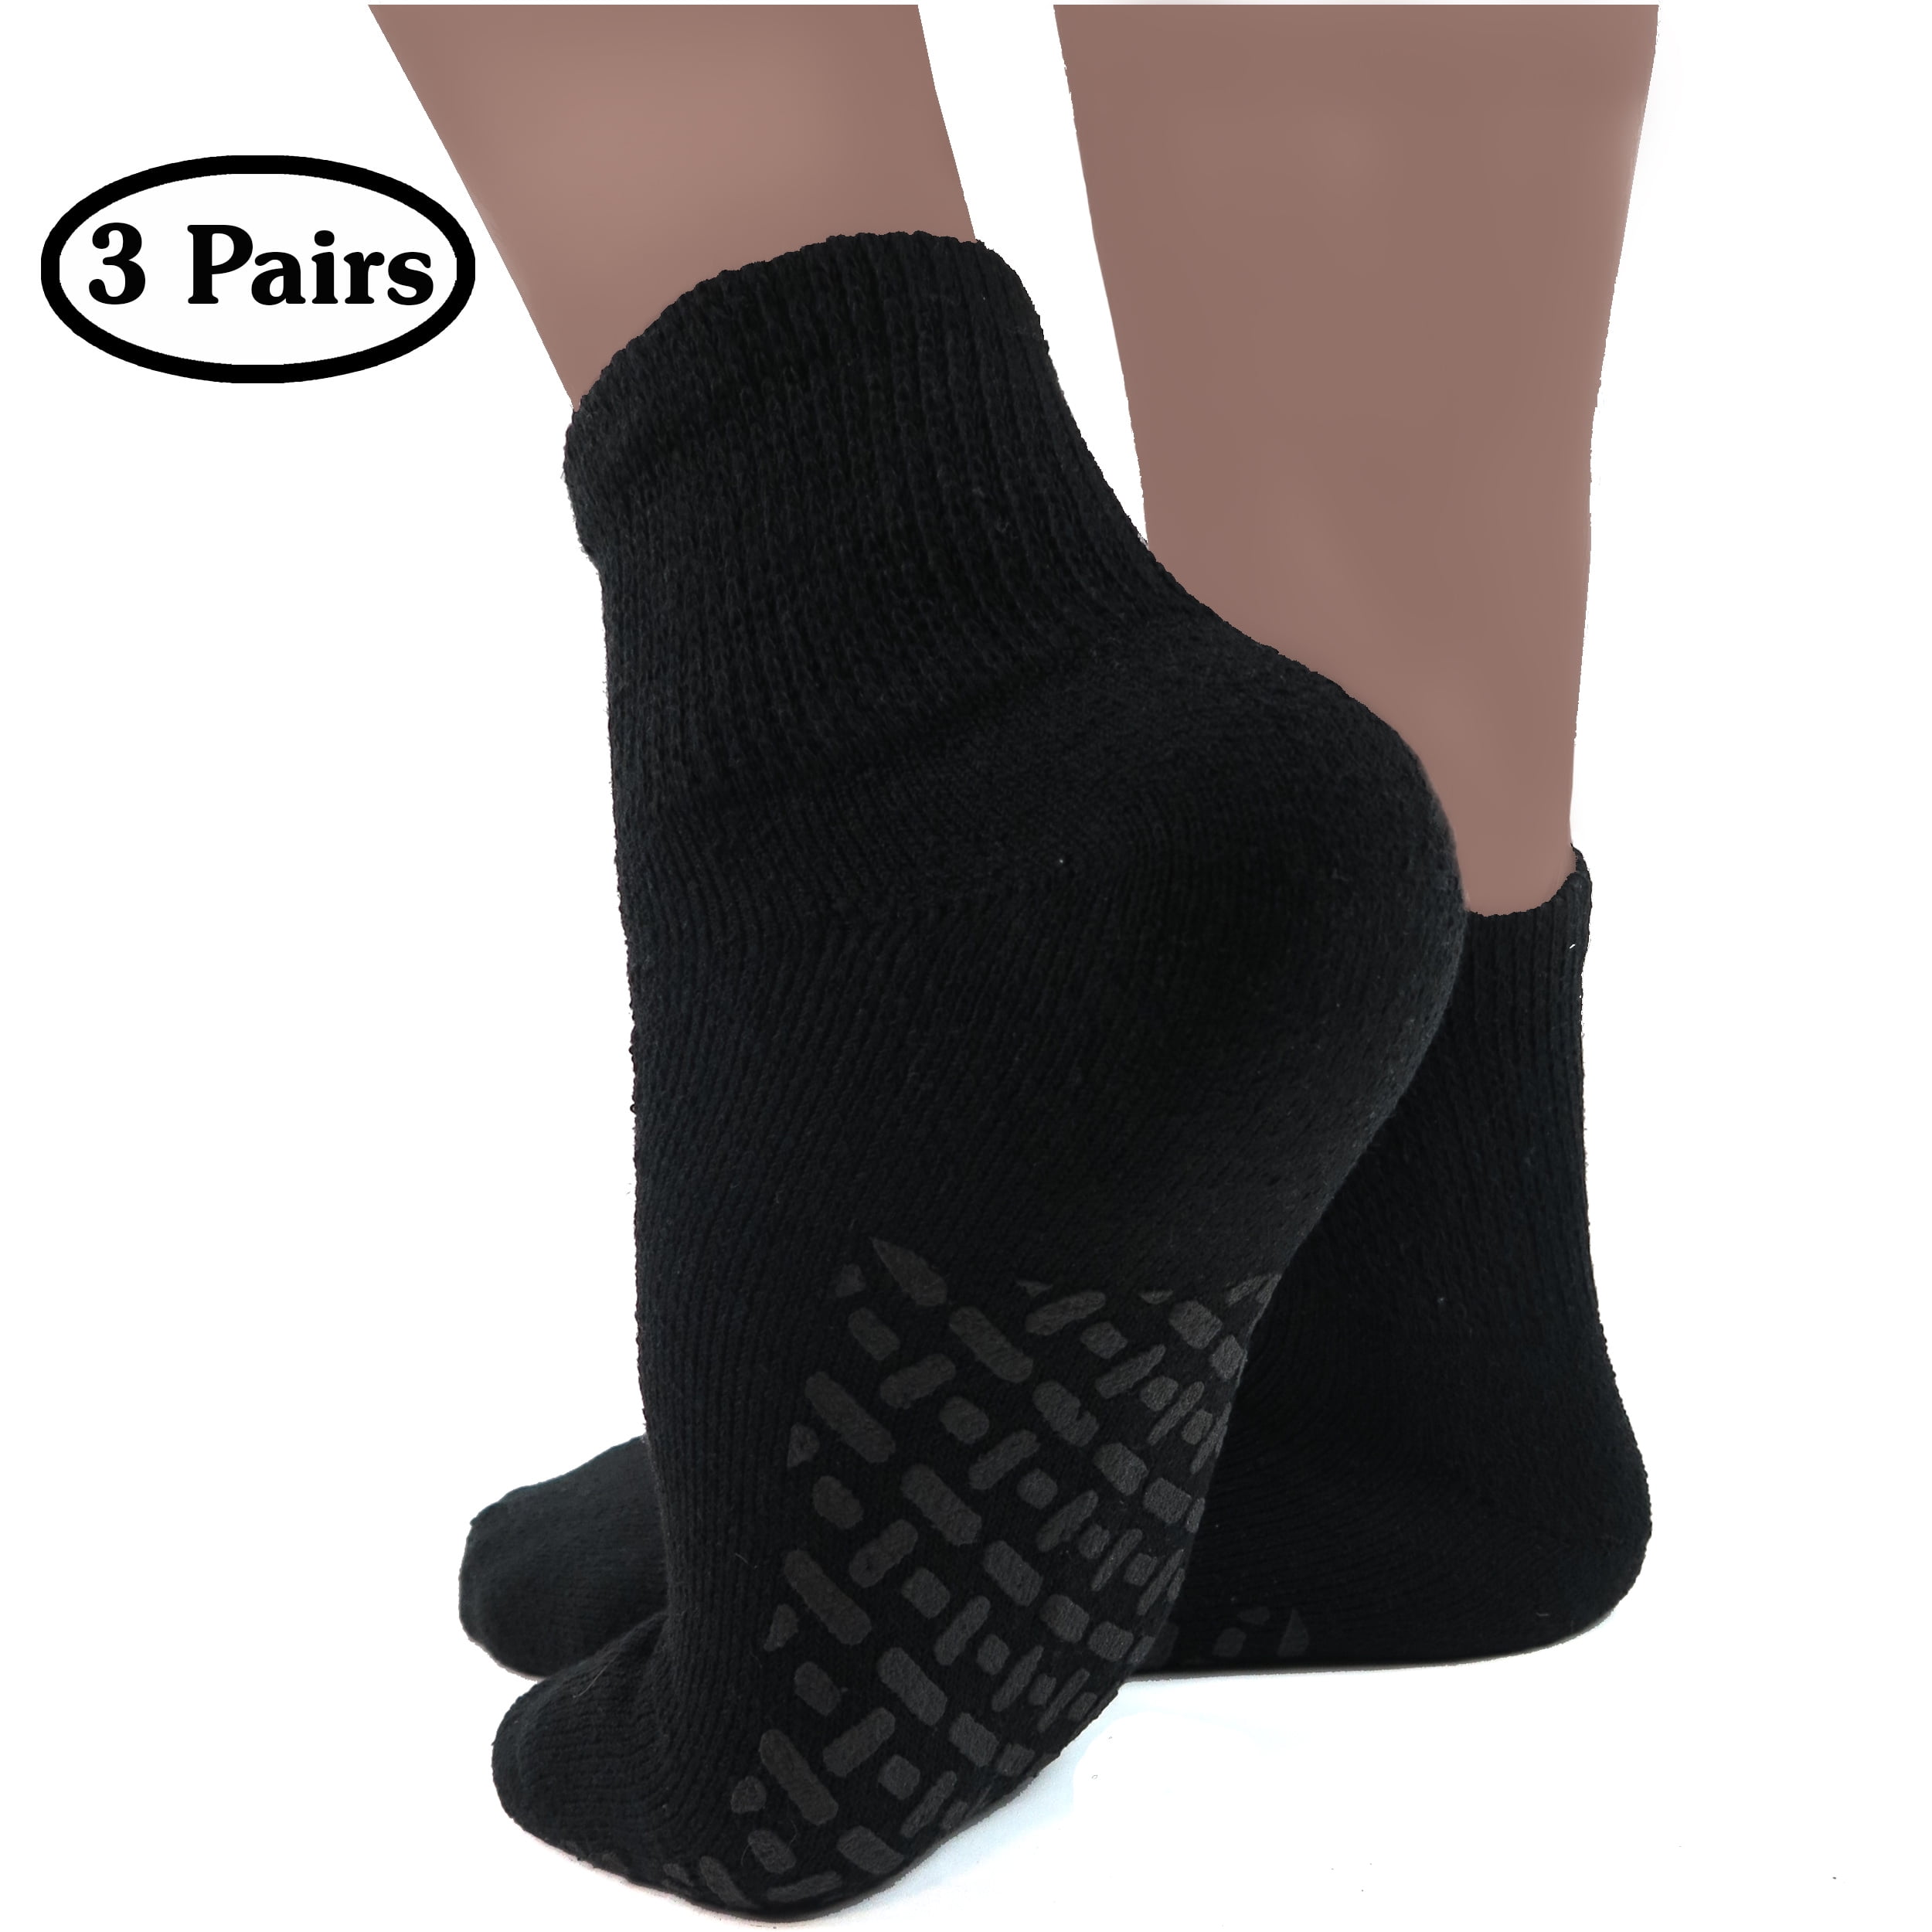 non skid socks for adults